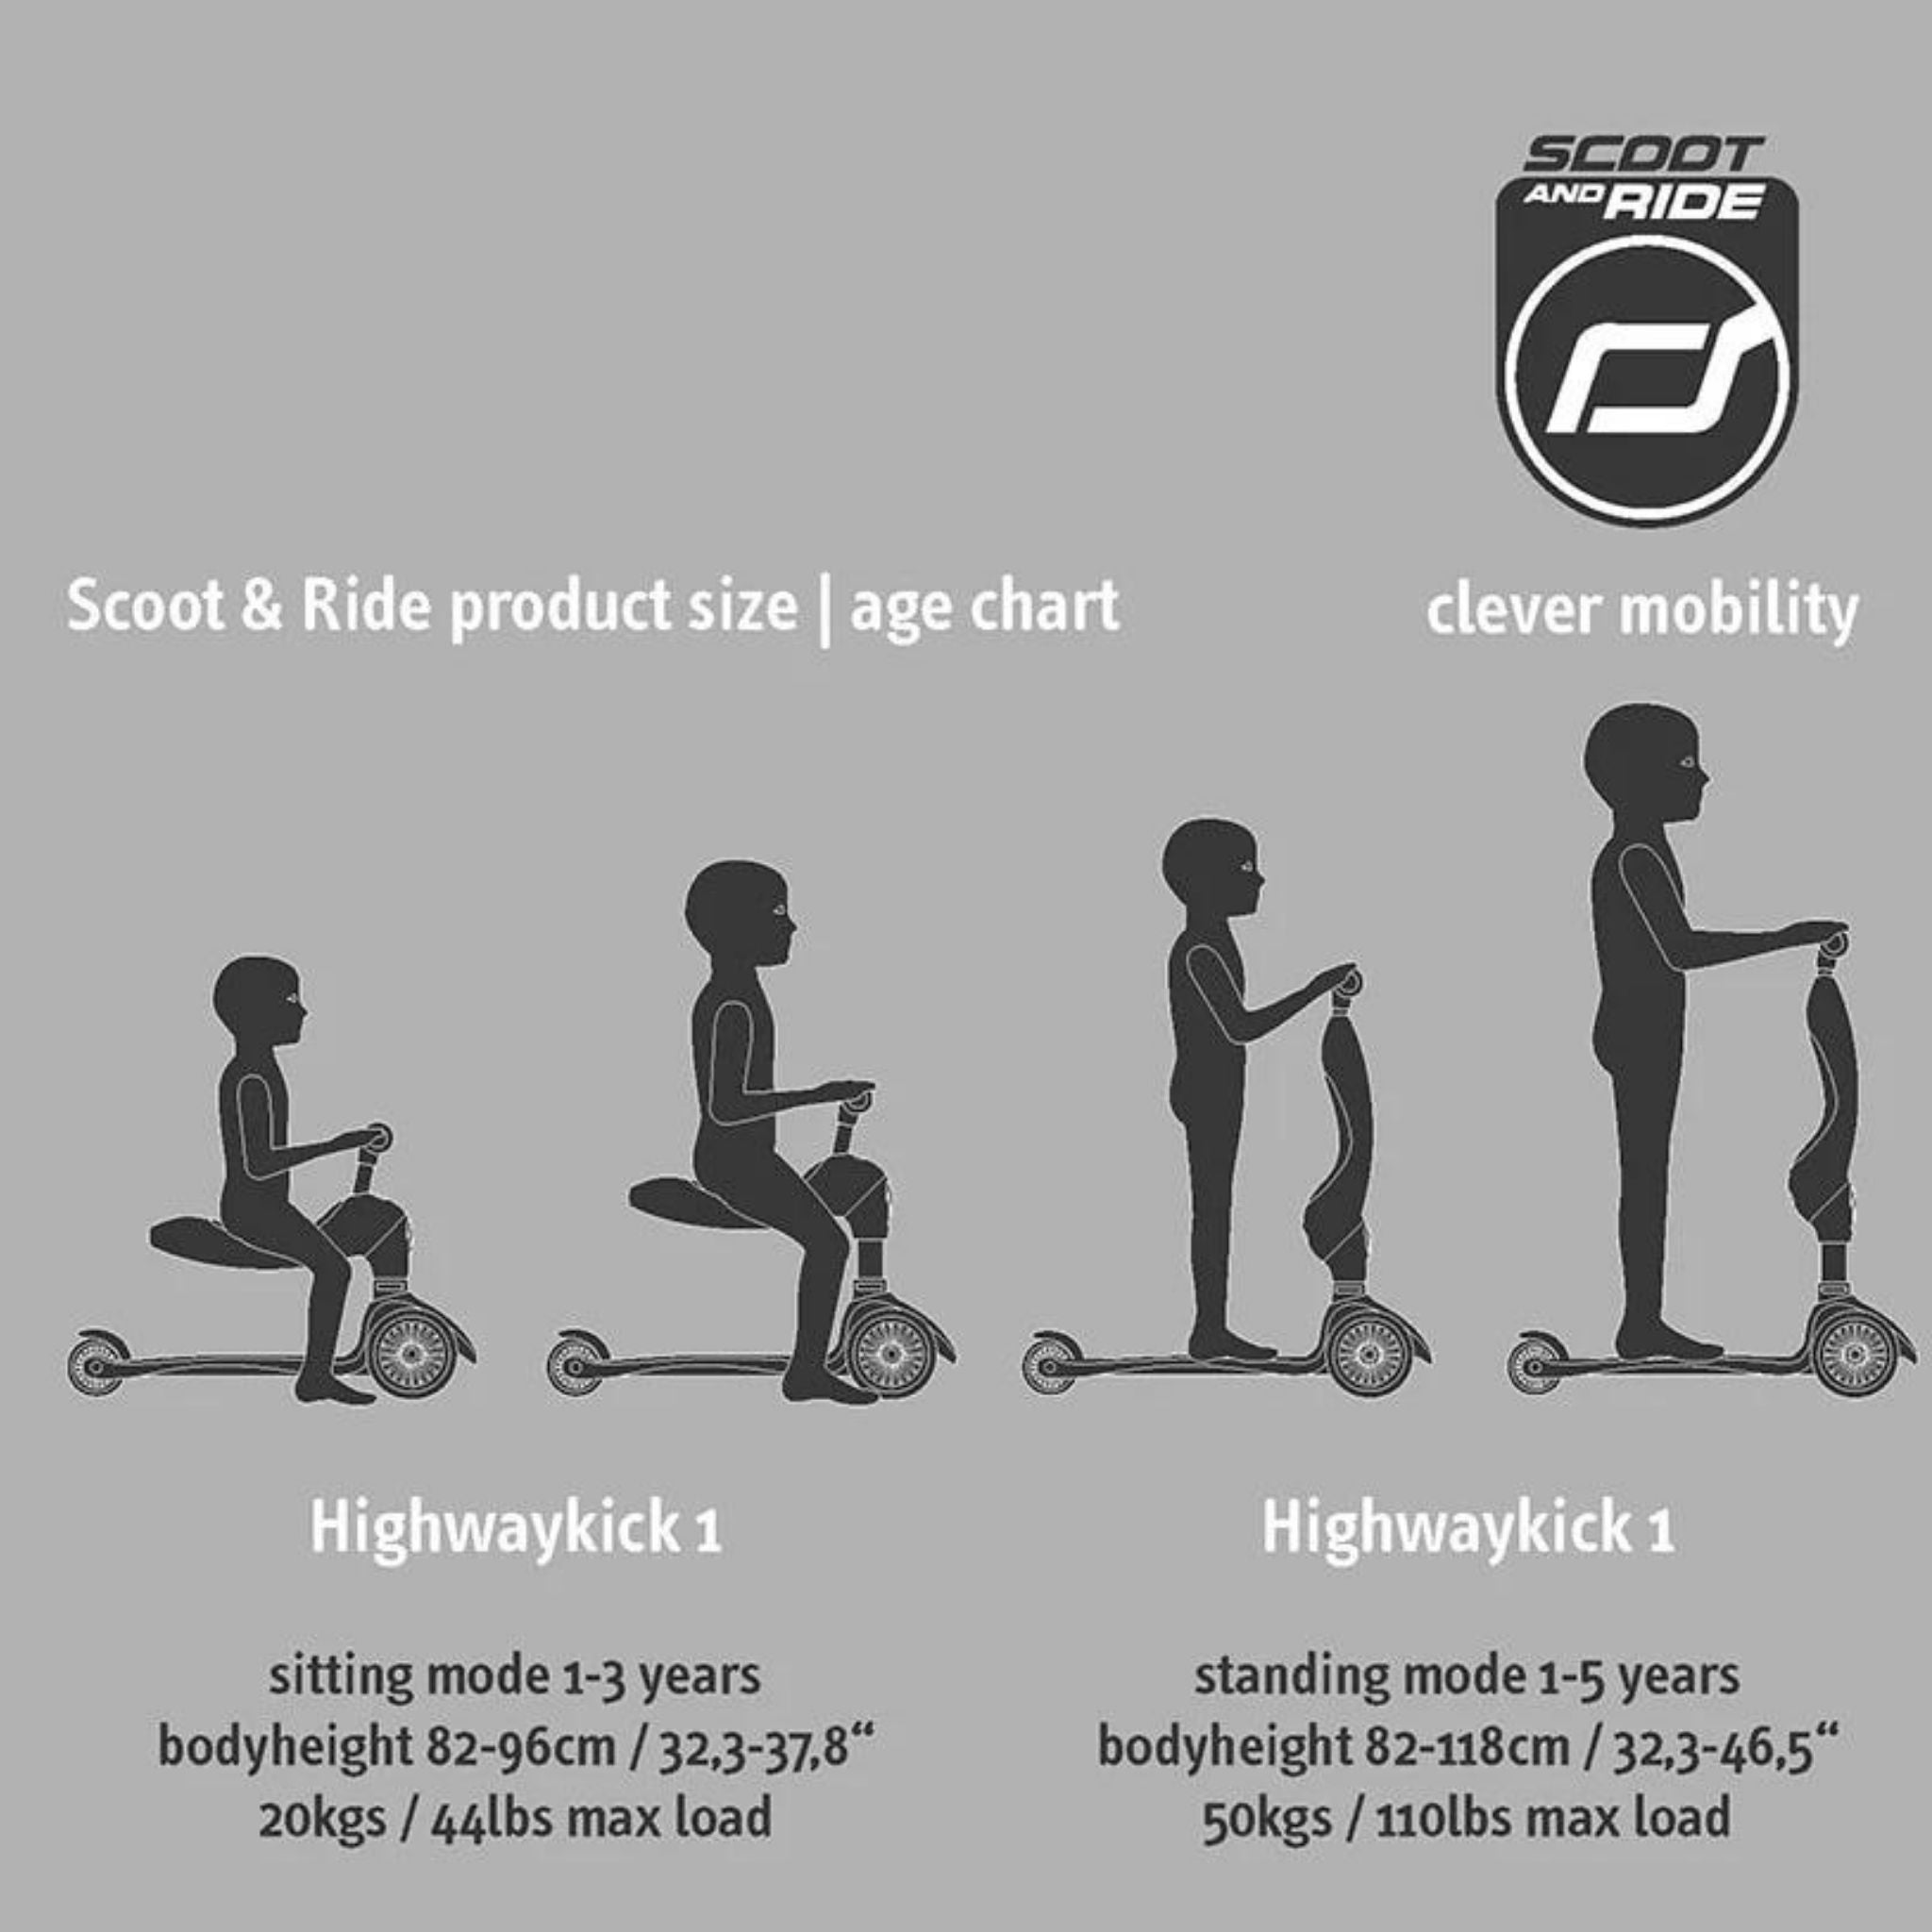 Find the best price on Scoot & Ride Highwaykick 1